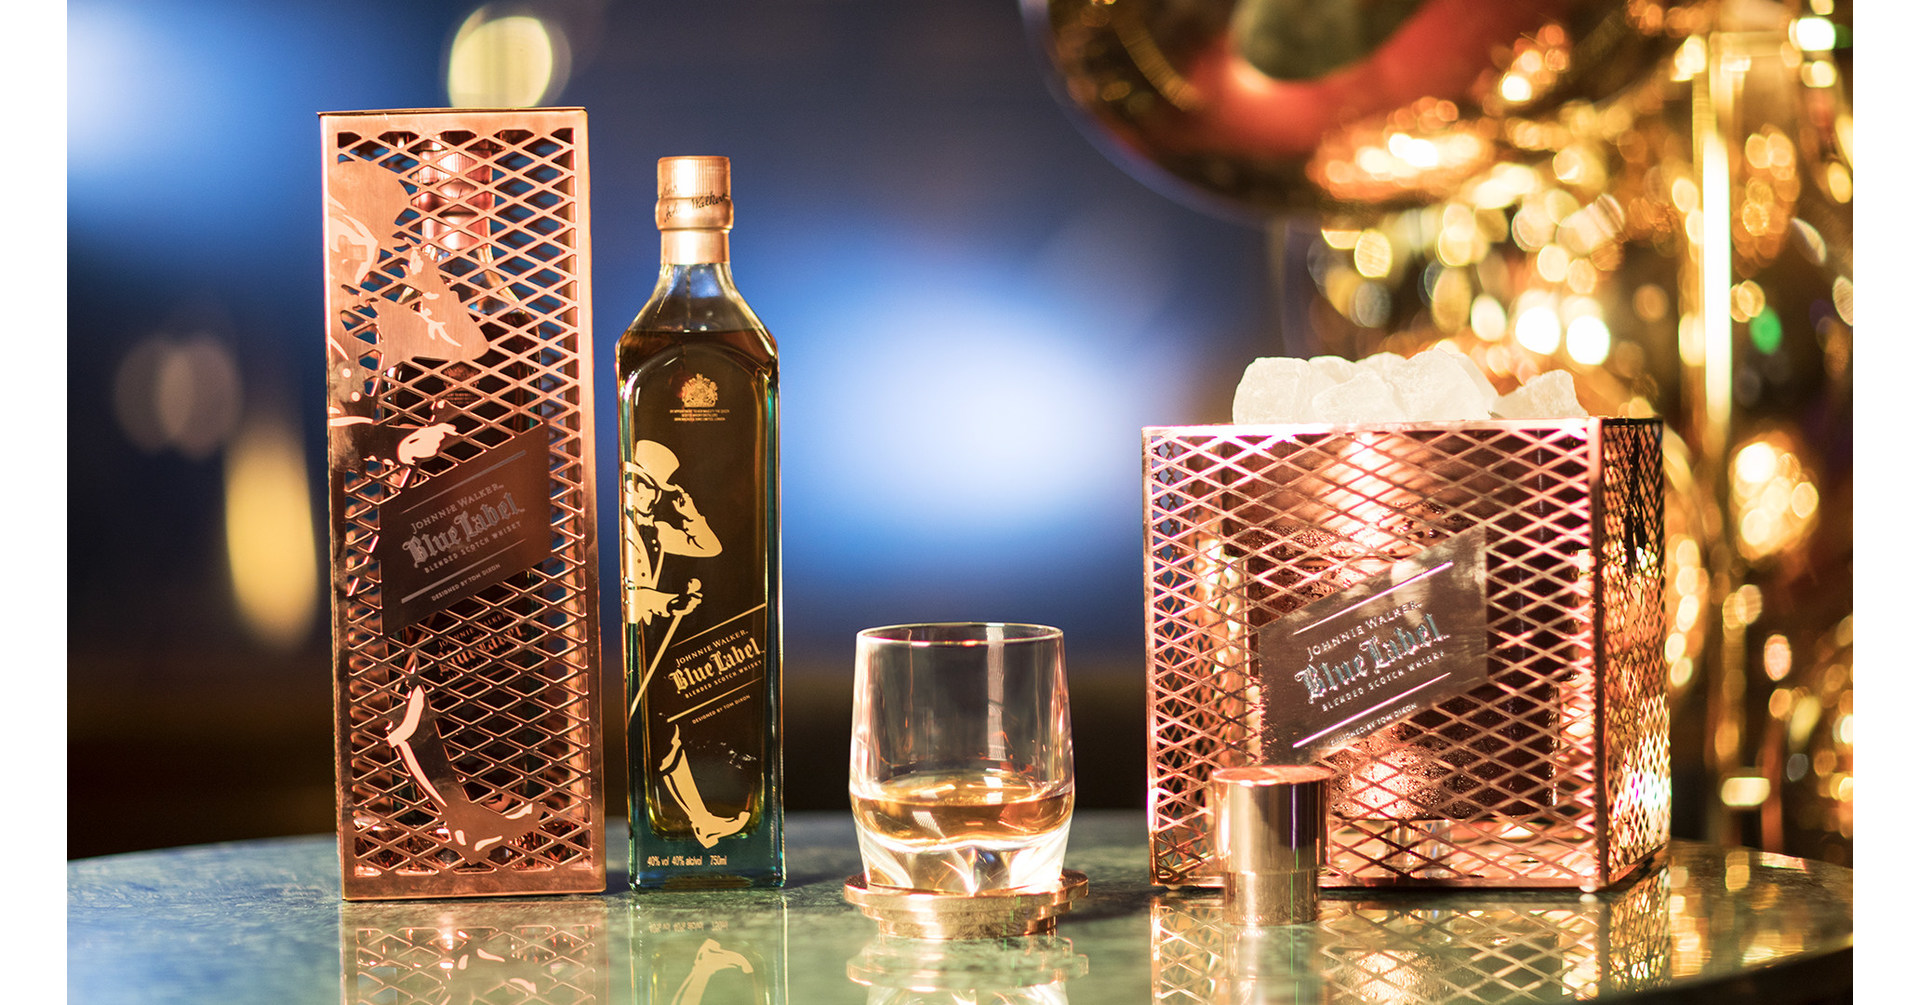 Johnnie Walker Blue Label Xordinaire is a brand-new product